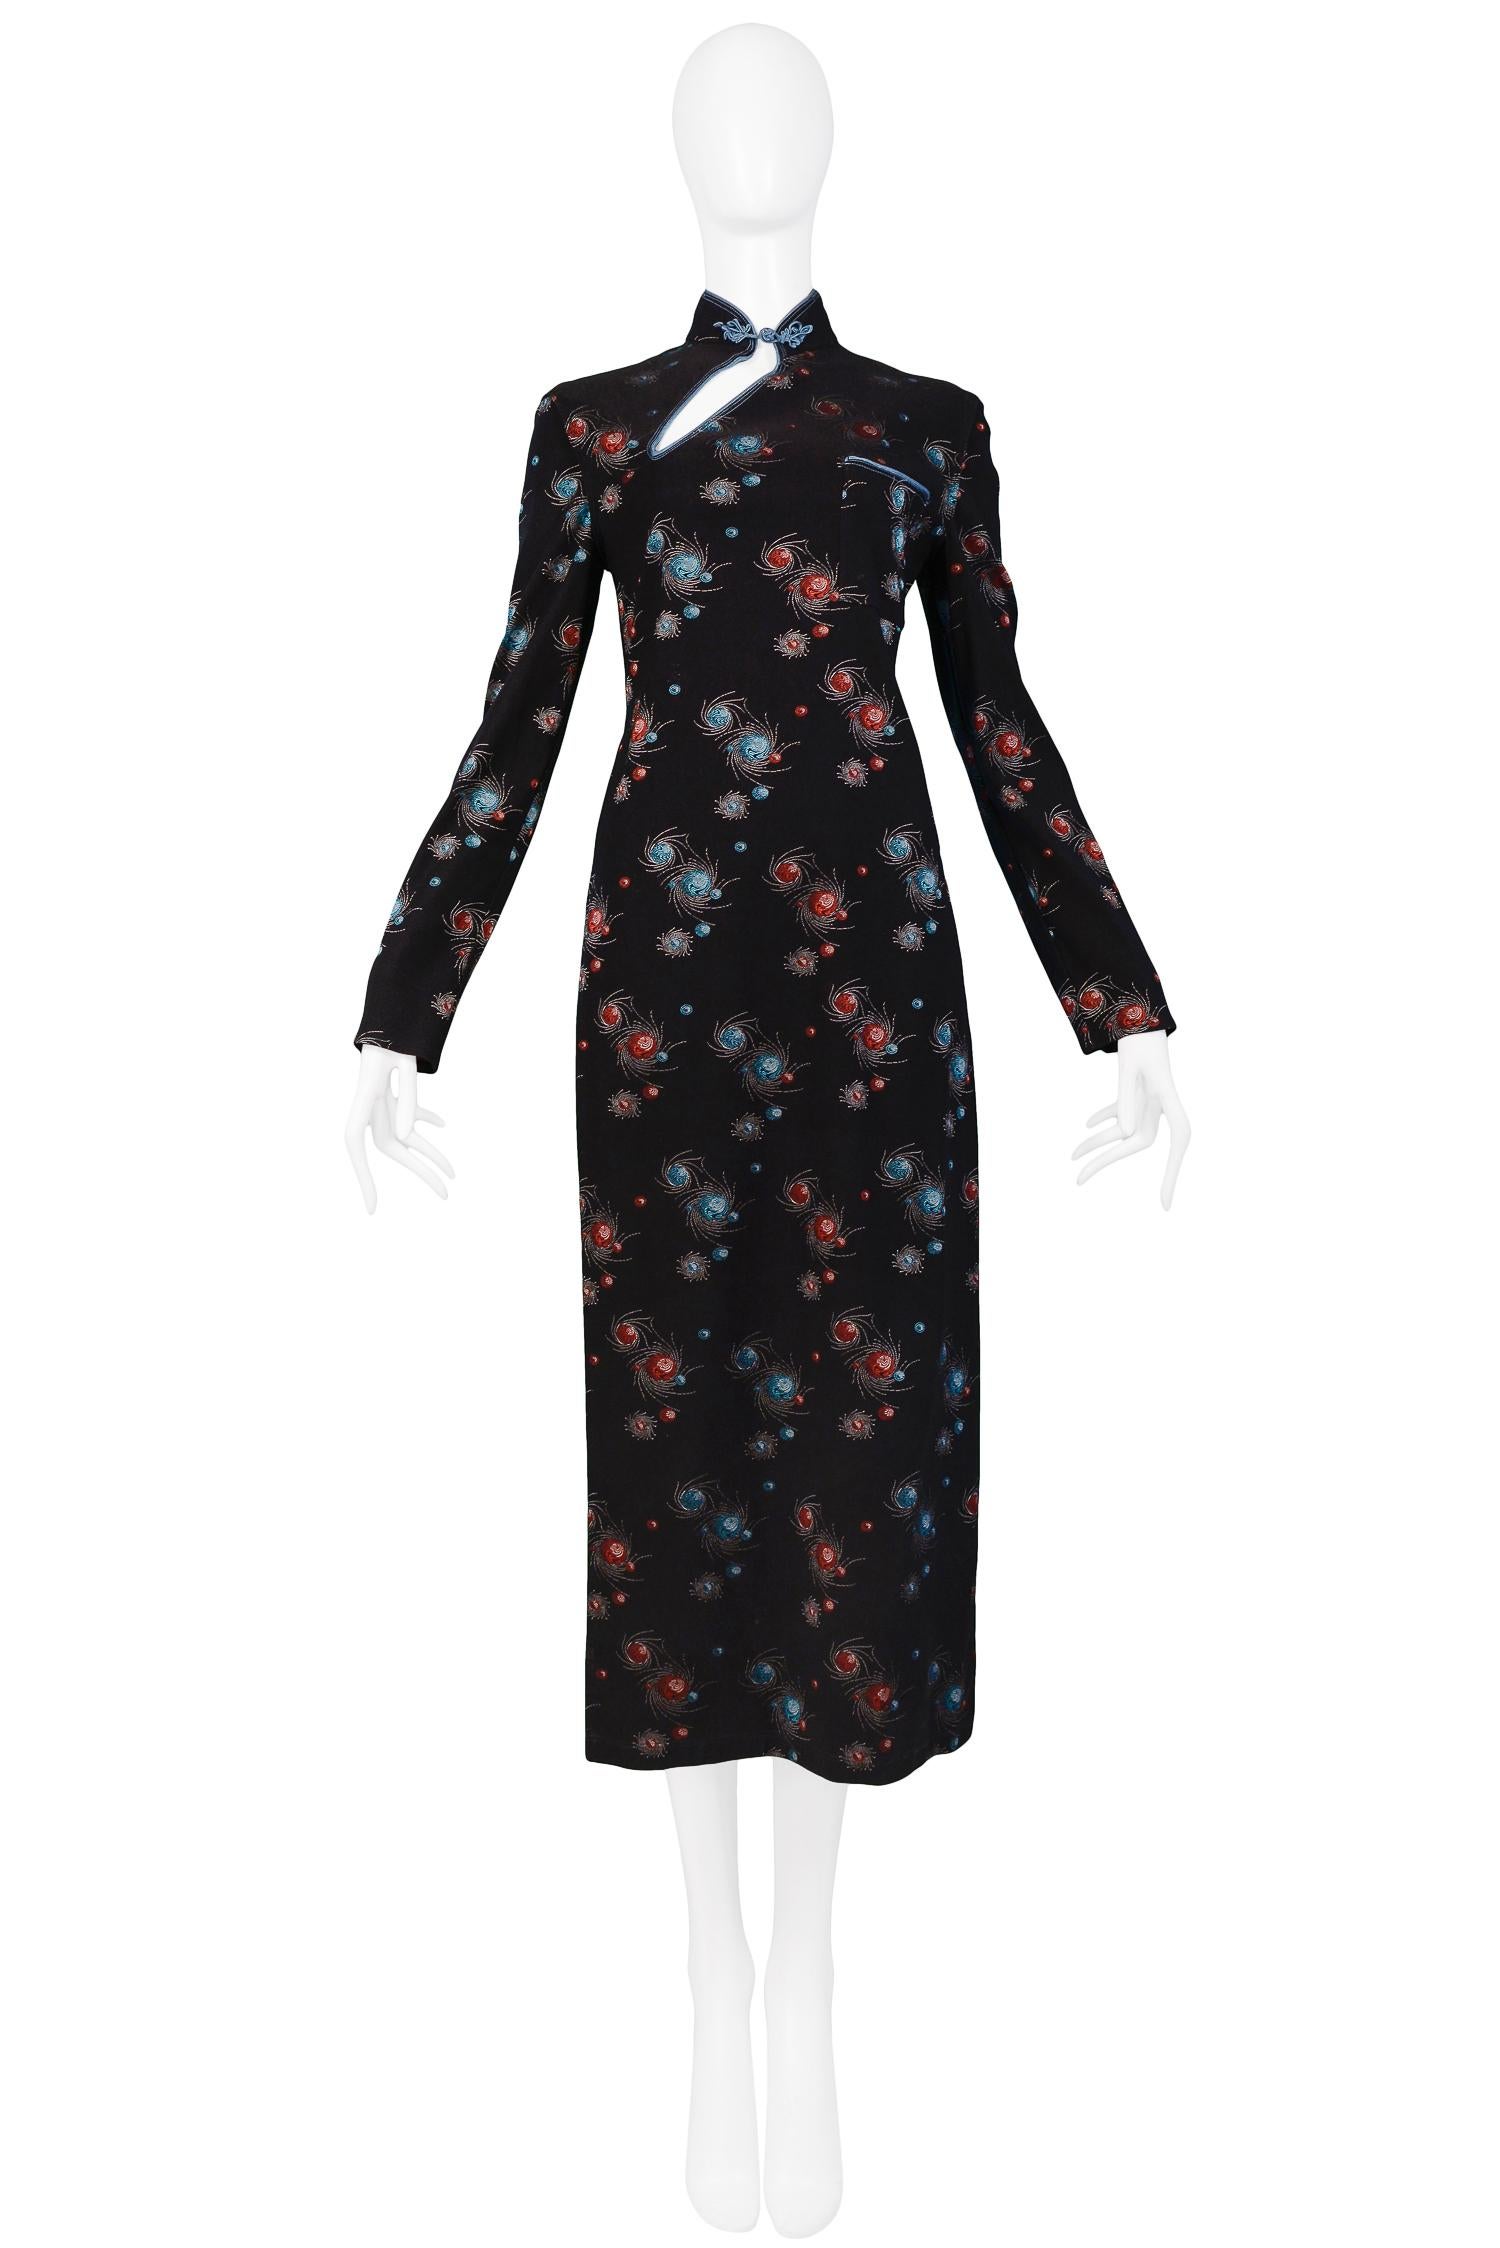 Vintage Jean Paul Gaultier black nylon long sleeve dress featuring an all over blue & red galaxy print, Mandarin collar, abstract keyhole with frog closure at neck and slits from the hem to waist at each sides. From the 1994 Collection.

Condition: